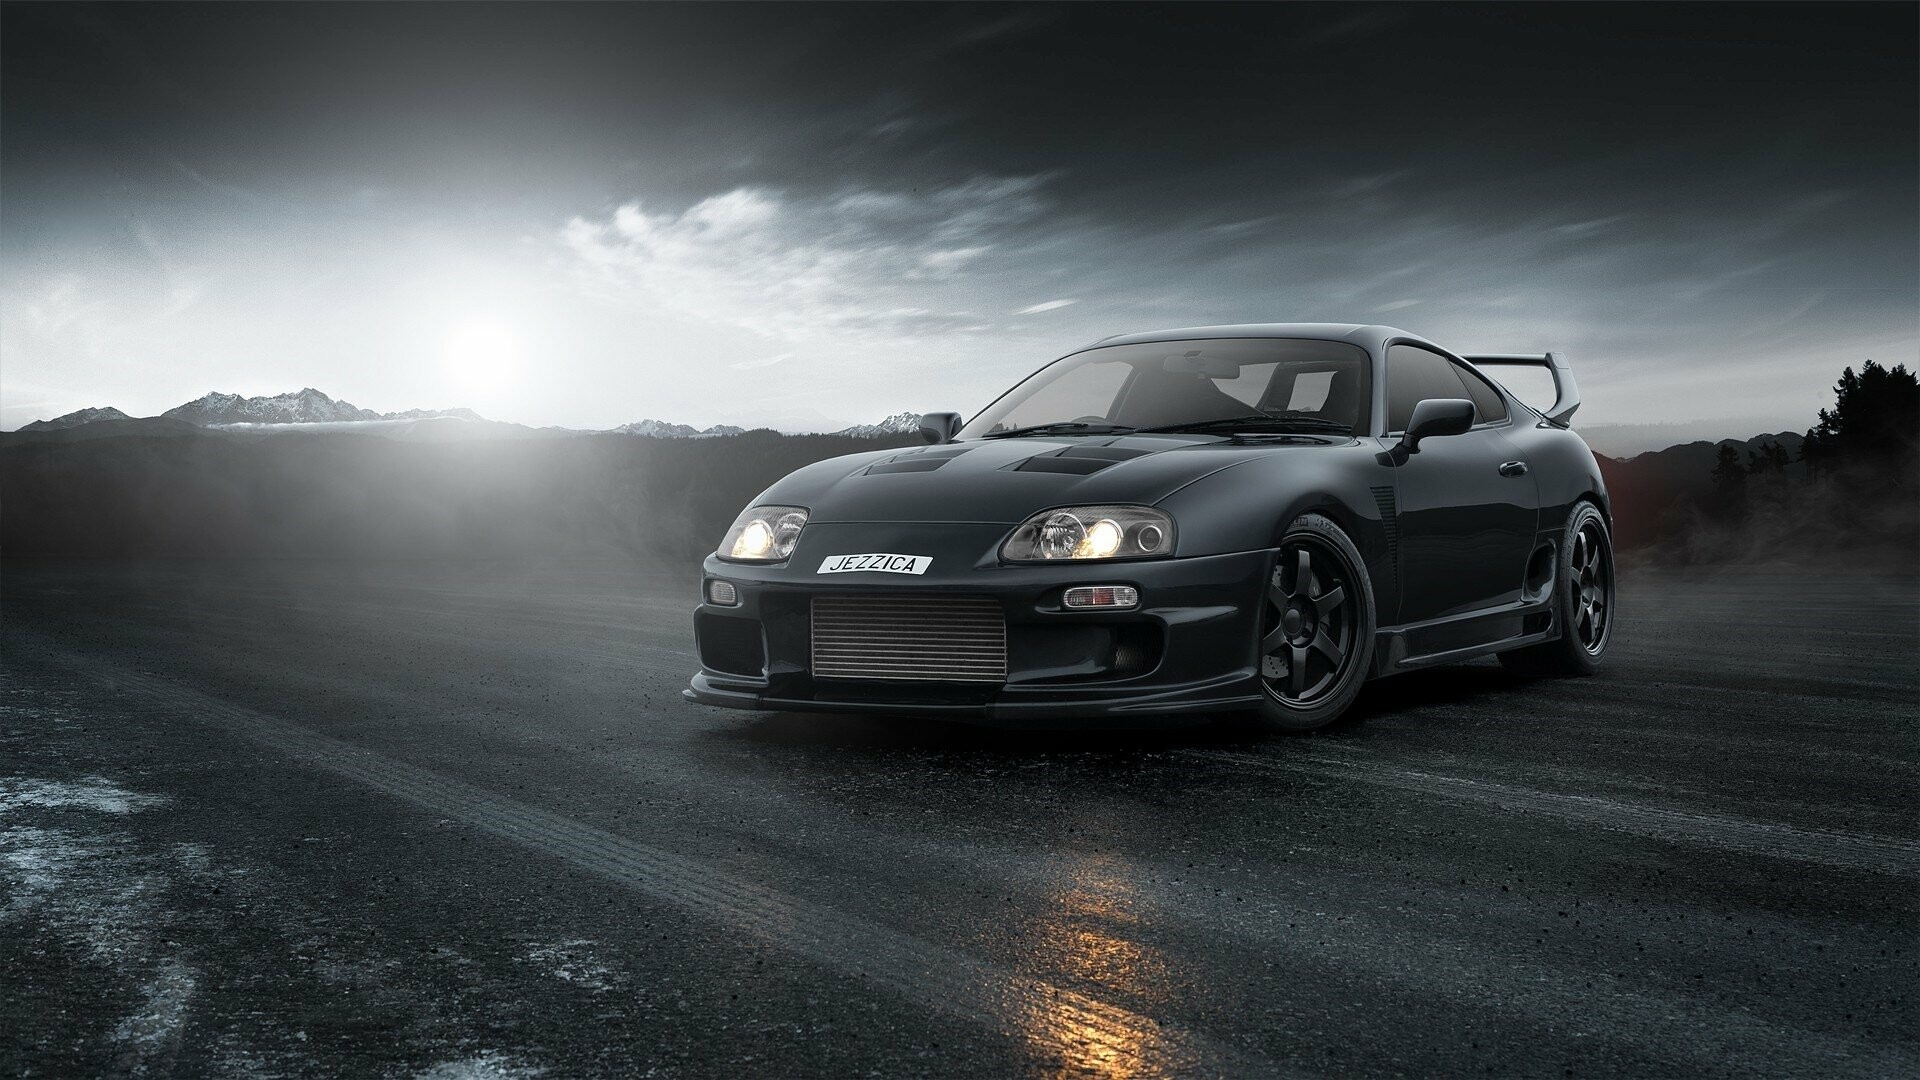 Toyota: Supra, A sports car and grand tourer manufactured by TMC. 1920x1080 Full HD Wallpaper.